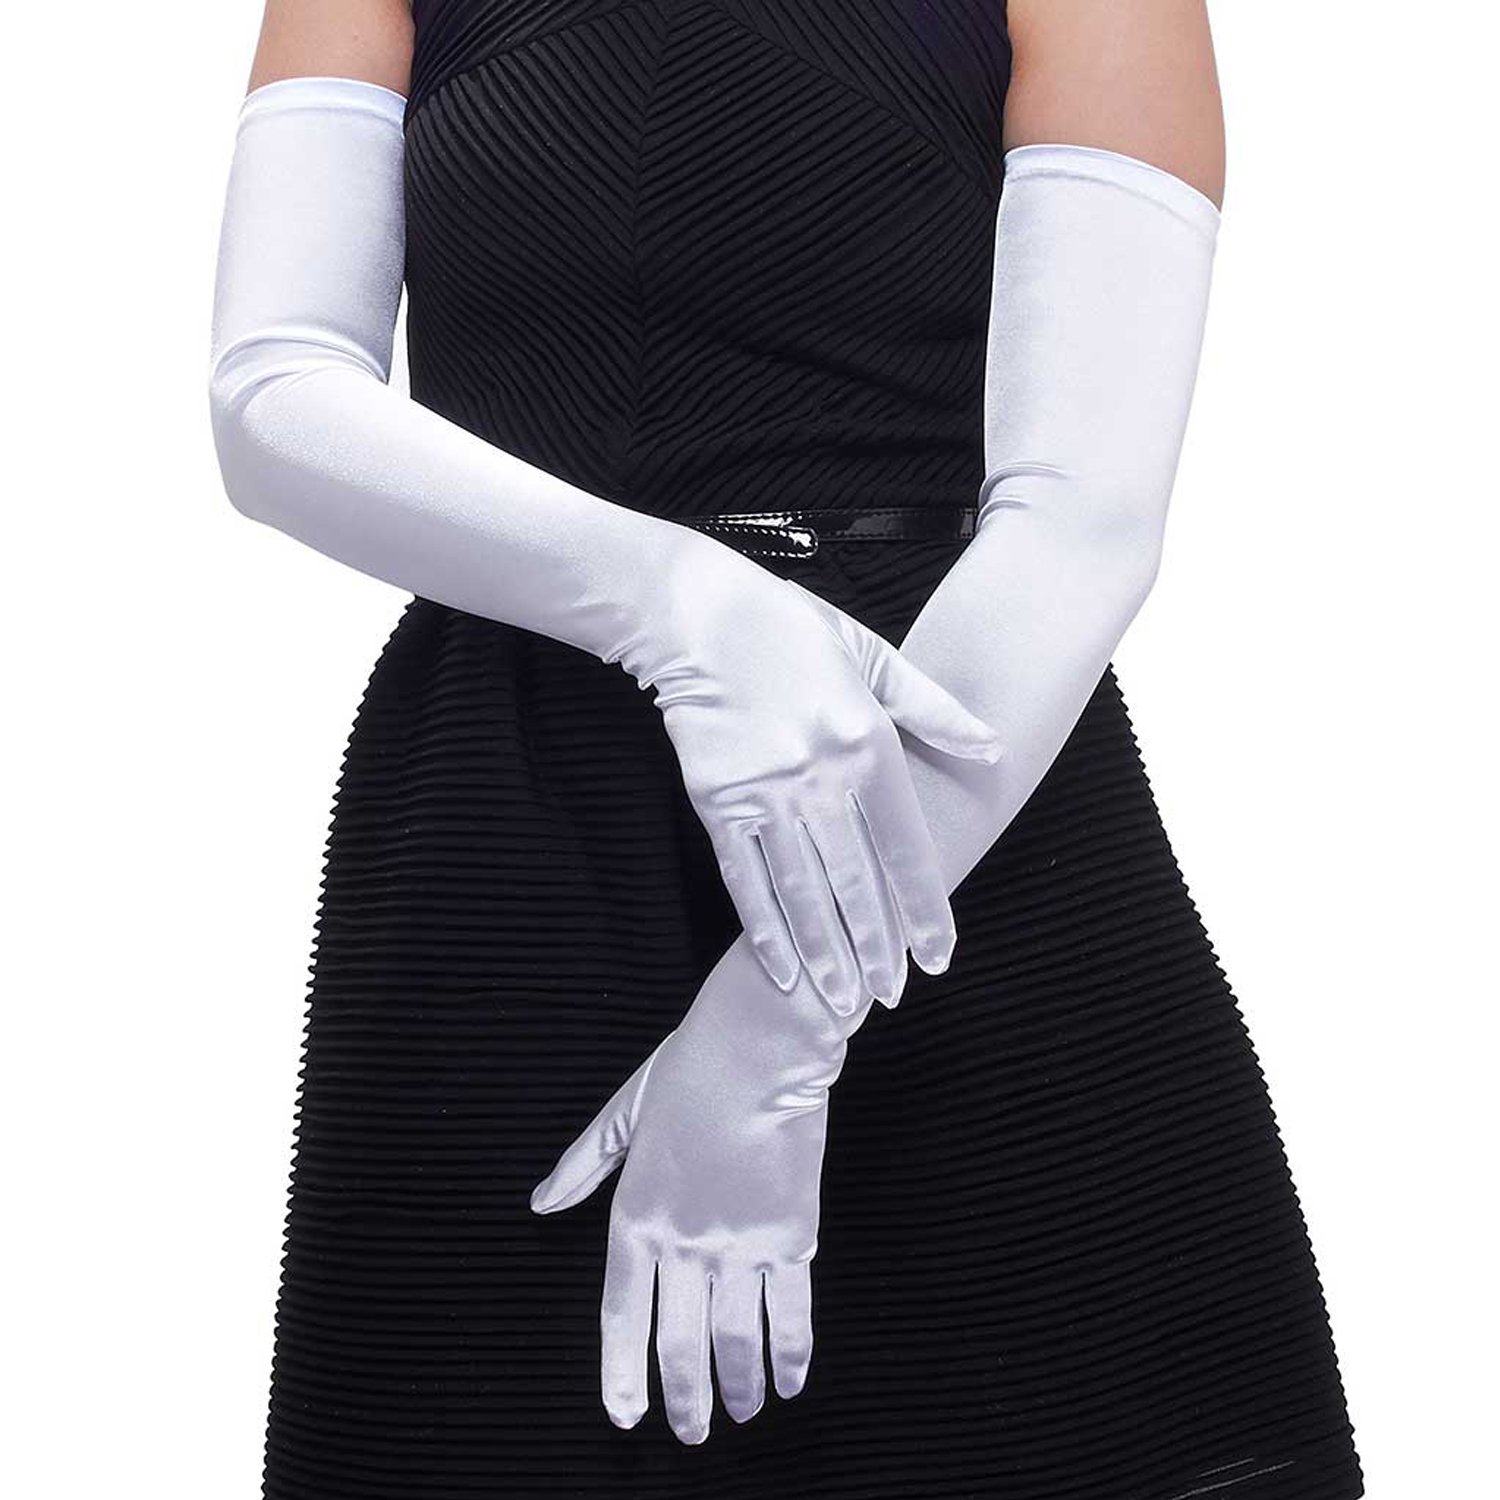 Long Opera Party Gloves for Women 1920s 20s Satin Gloves Costumes Elbow Length Bridal Evening Dress, 22 inches